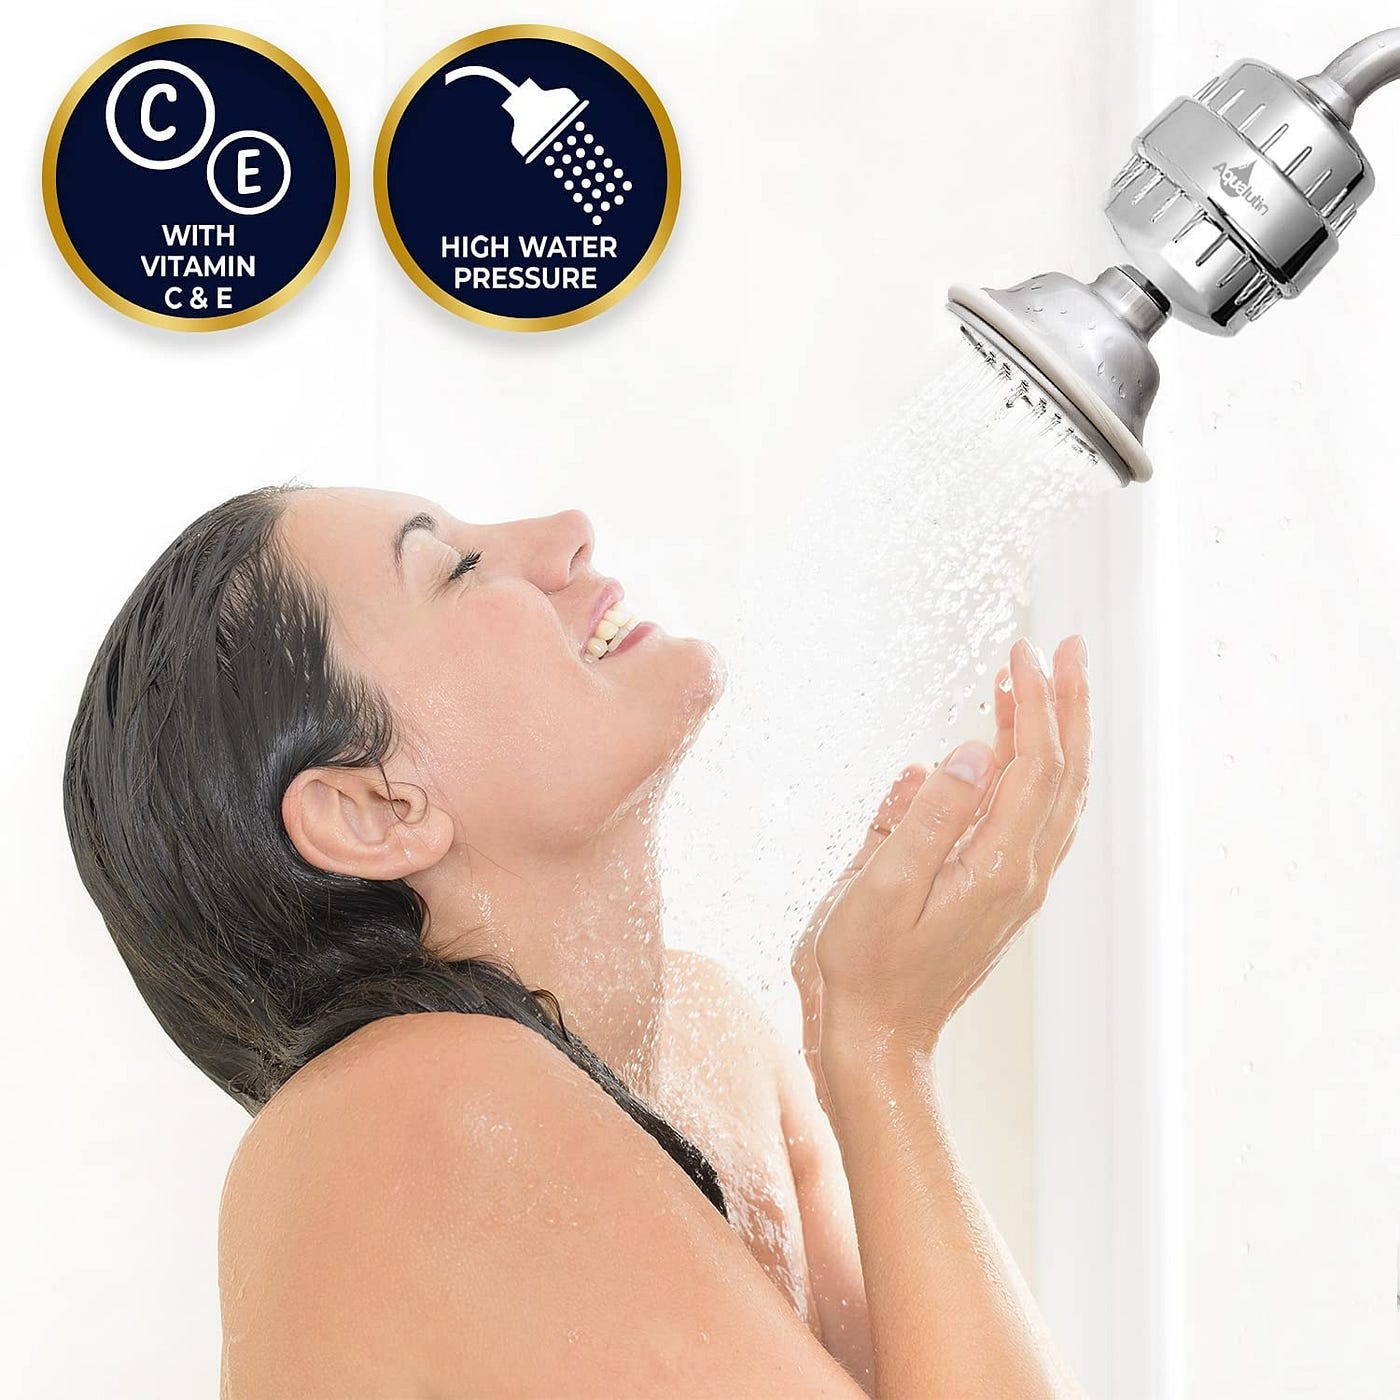 15 Stage Shower Filter - Shower Head Filter - bwdm Hard Water Filter,  Remove Chlorine Heavy Metals and other Impurities, Vitamin C Water Softener  Reduces Dry Itchy Skin, Dandruff (Chrome) 